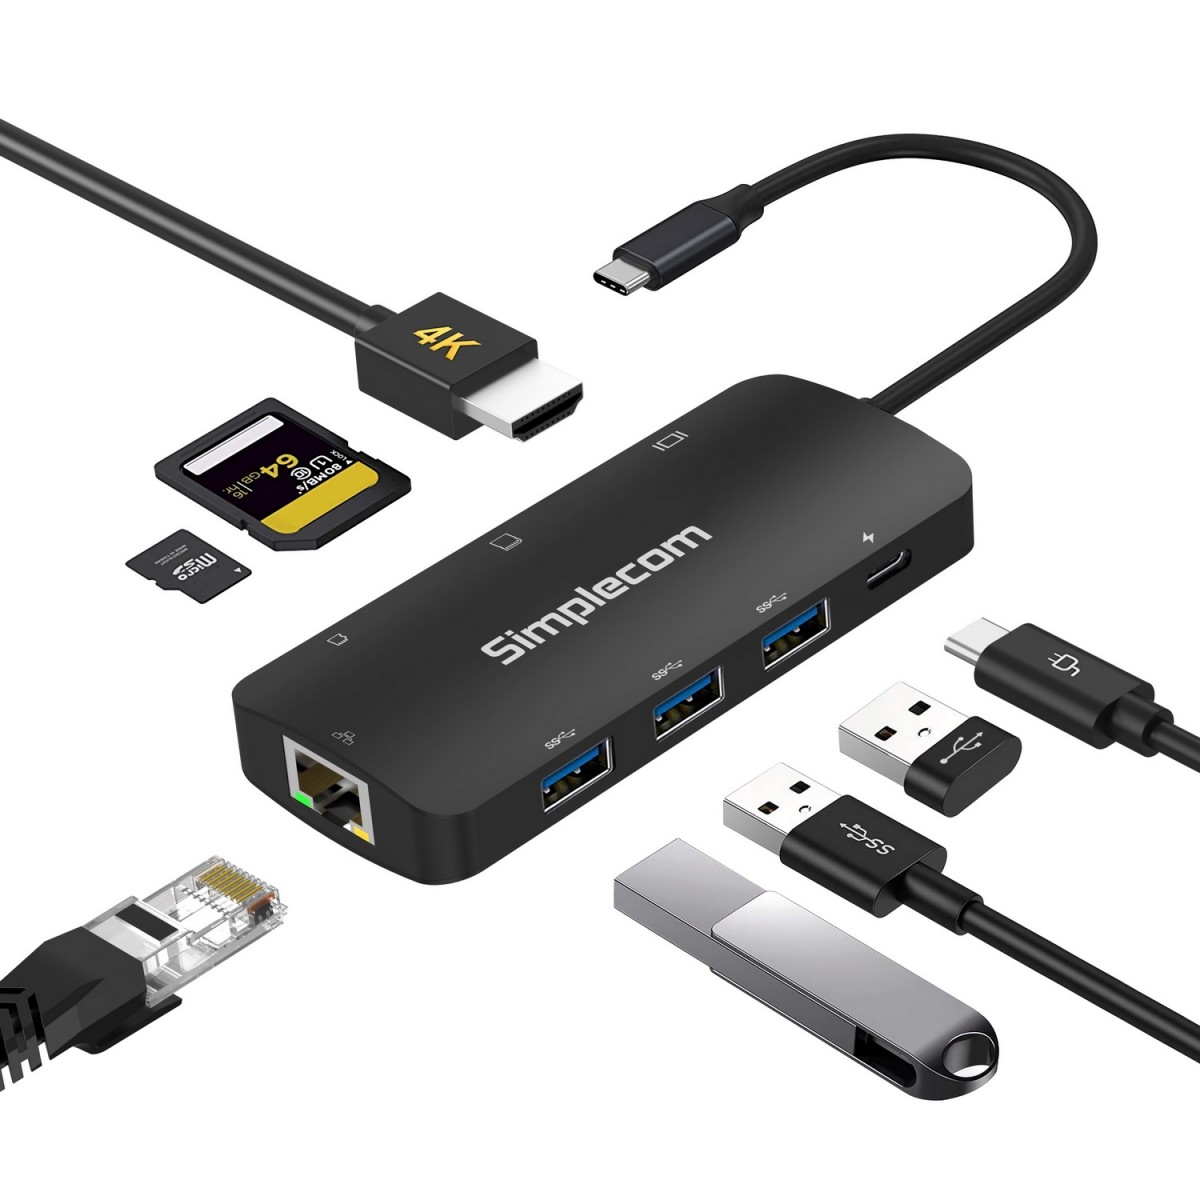 A large marketing image providing additional information about the product Simplecom CHT580 USB-C SuperSpeed 8-in-1 Multiport Docking Station - Additional alt info not provided